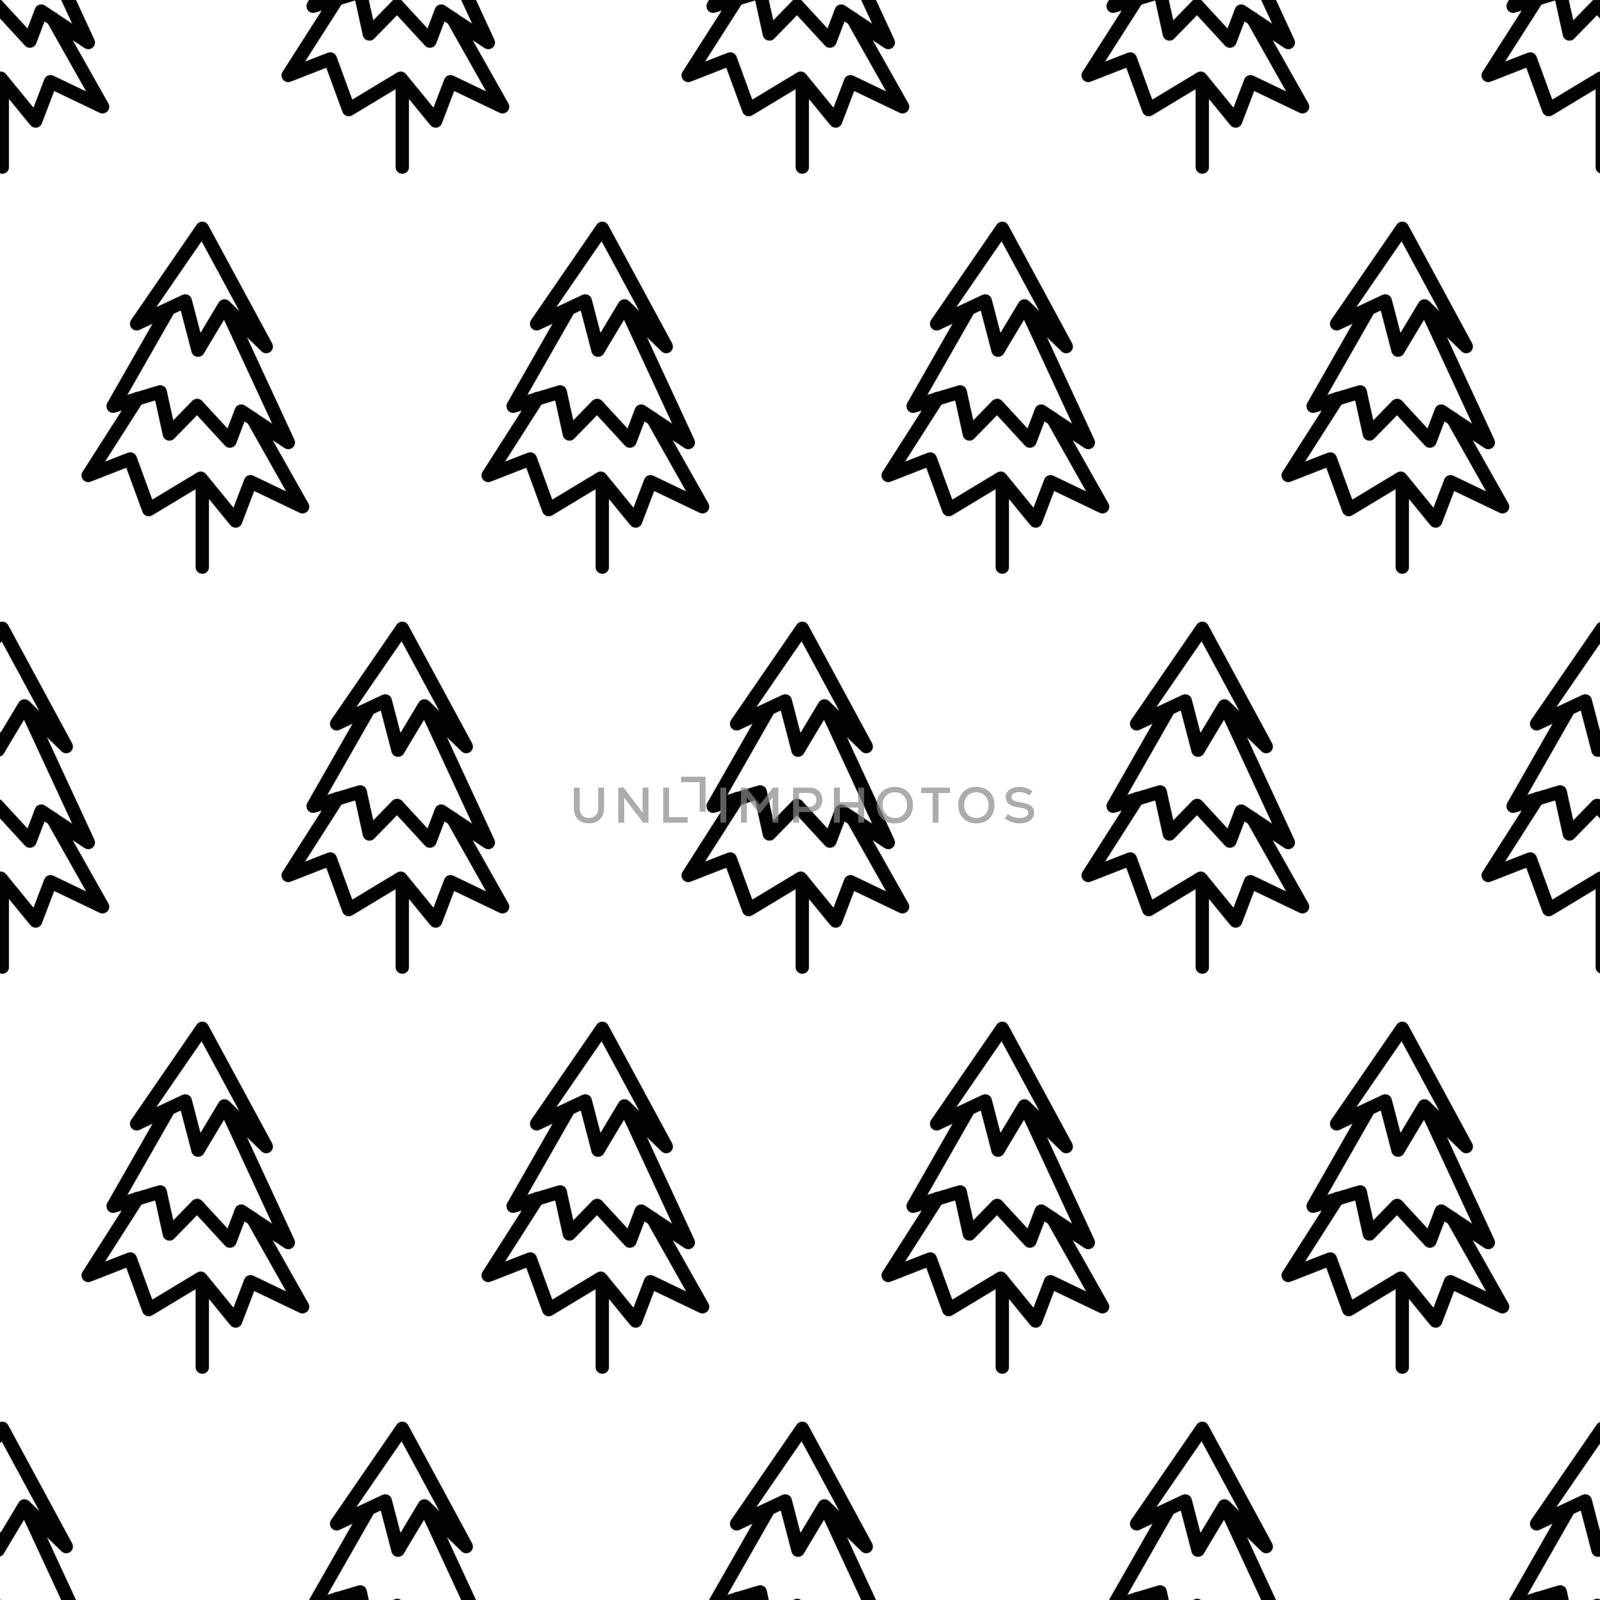 Black and white seamless pattern with fir tree icon. Vector trees symbol sign. Plants, landscape design for print, card, postcard, fabric, textile. Business idea concept.